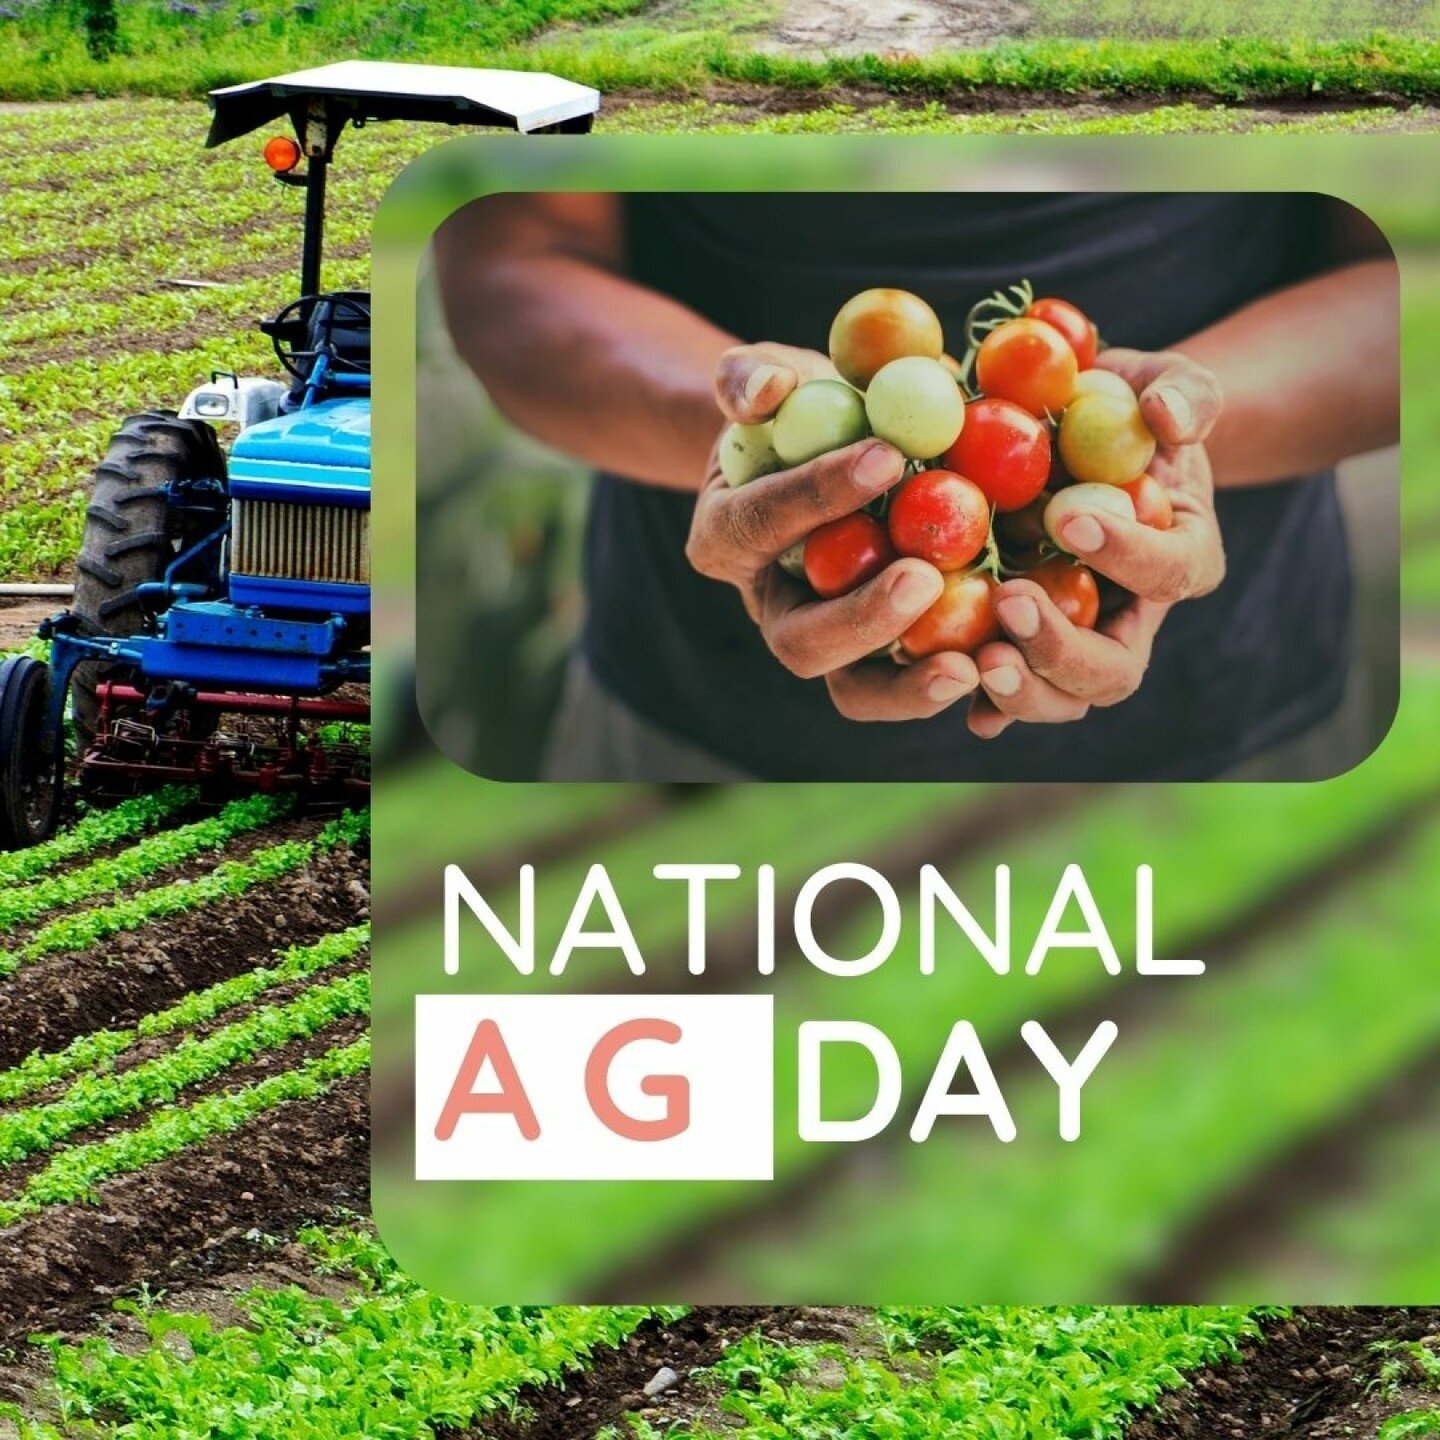 🚜 Today marks National Ag Day, a time to reflect on the incredible efforts of those who work daily to provide us with the food we enjoy daily. 

🚜From the farmers in the field land to the agricultural scientists pioneering new techniques, each indi